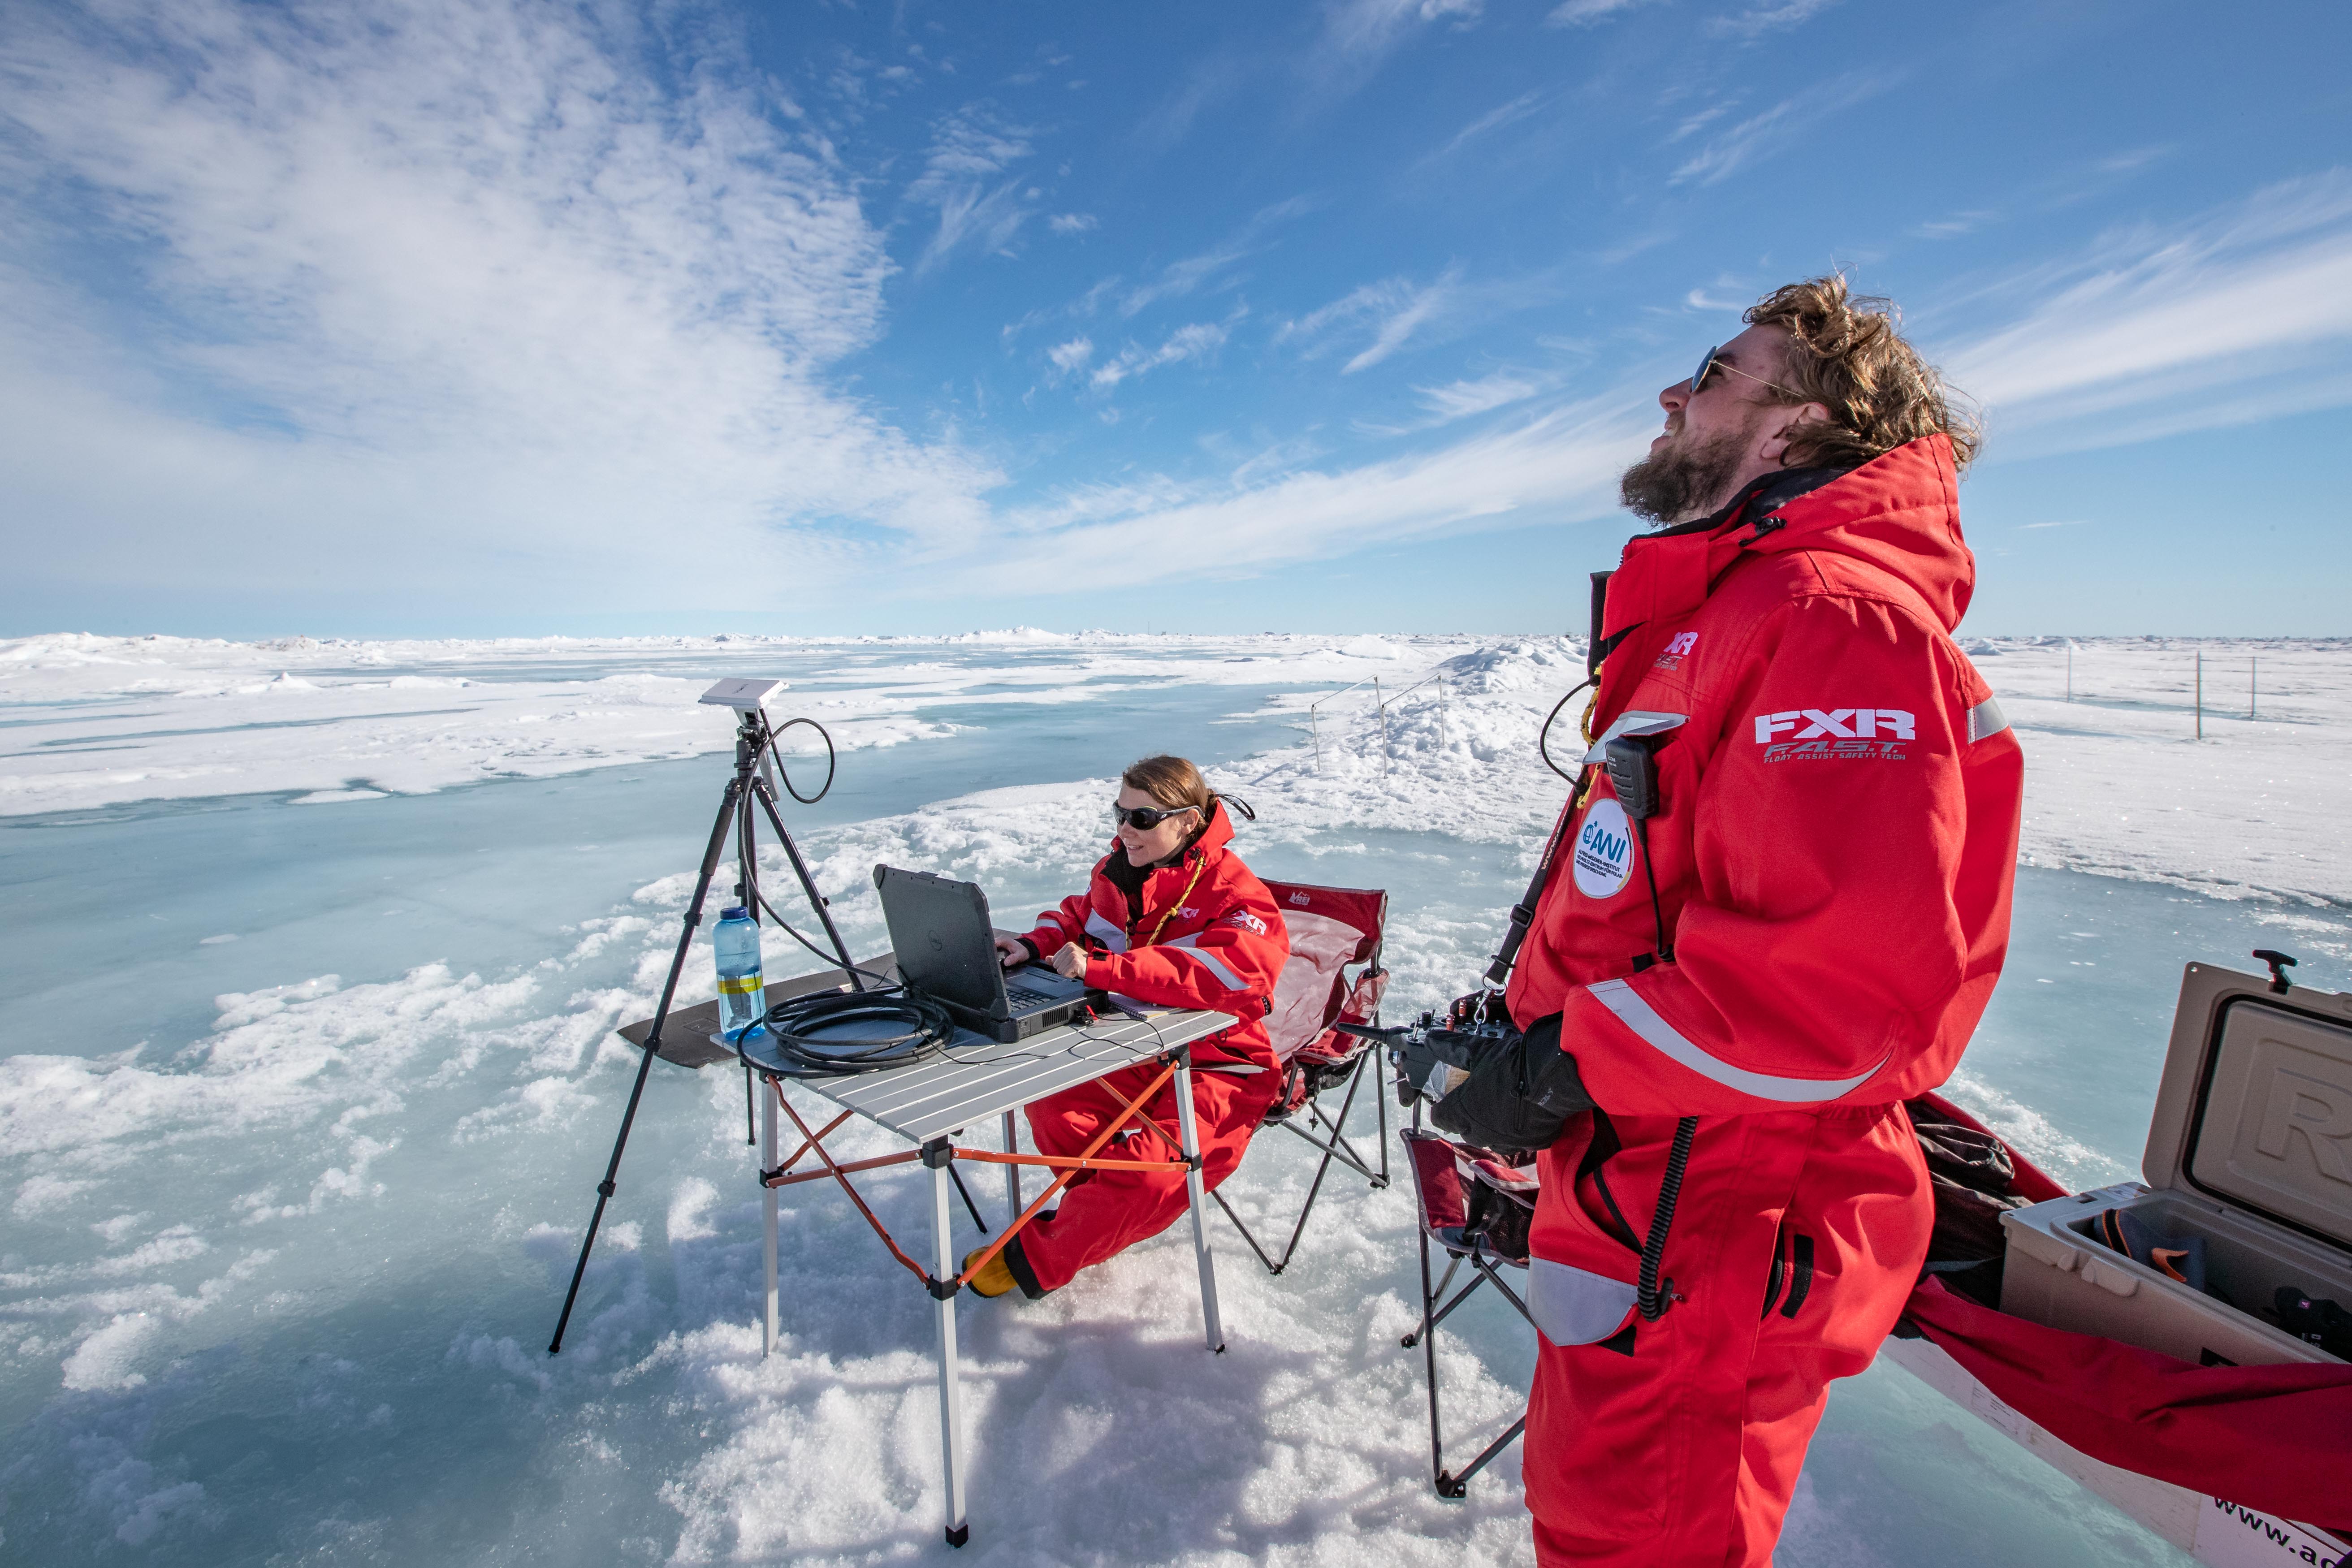 Scientists flying drones on the ice; Photo credit: Lianna Nixon